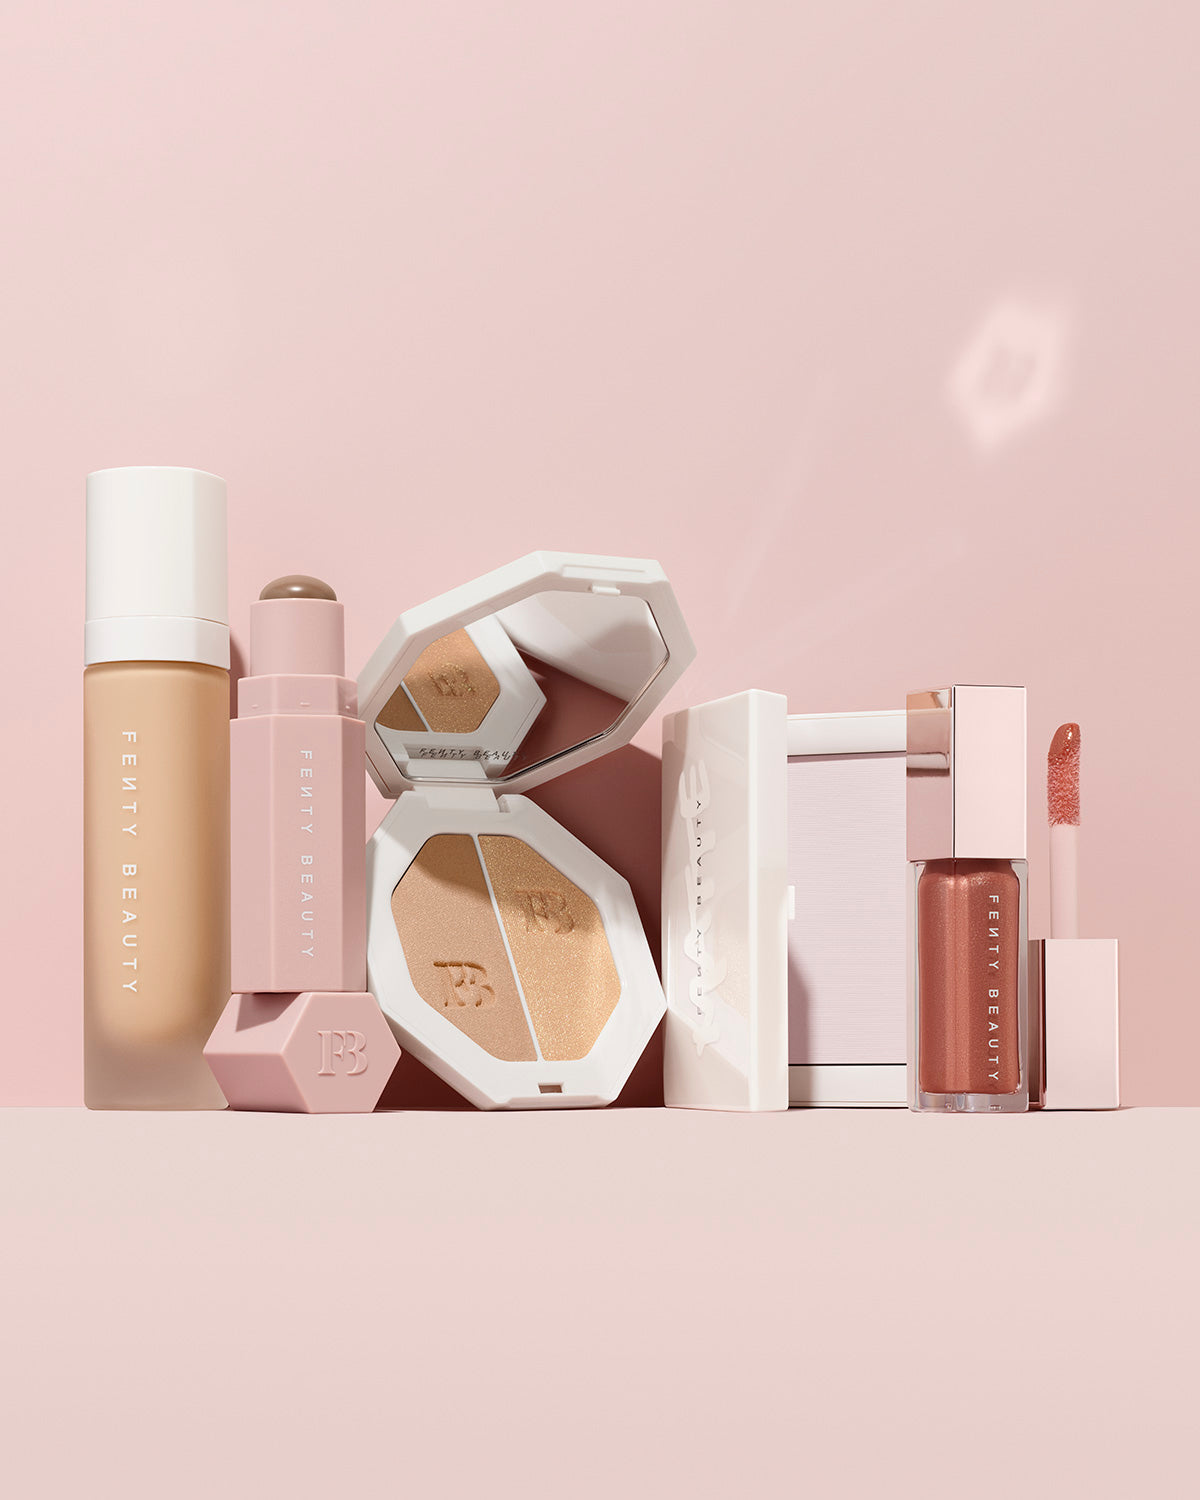 If you've been wanting to try Fenty Beauty's best-selling